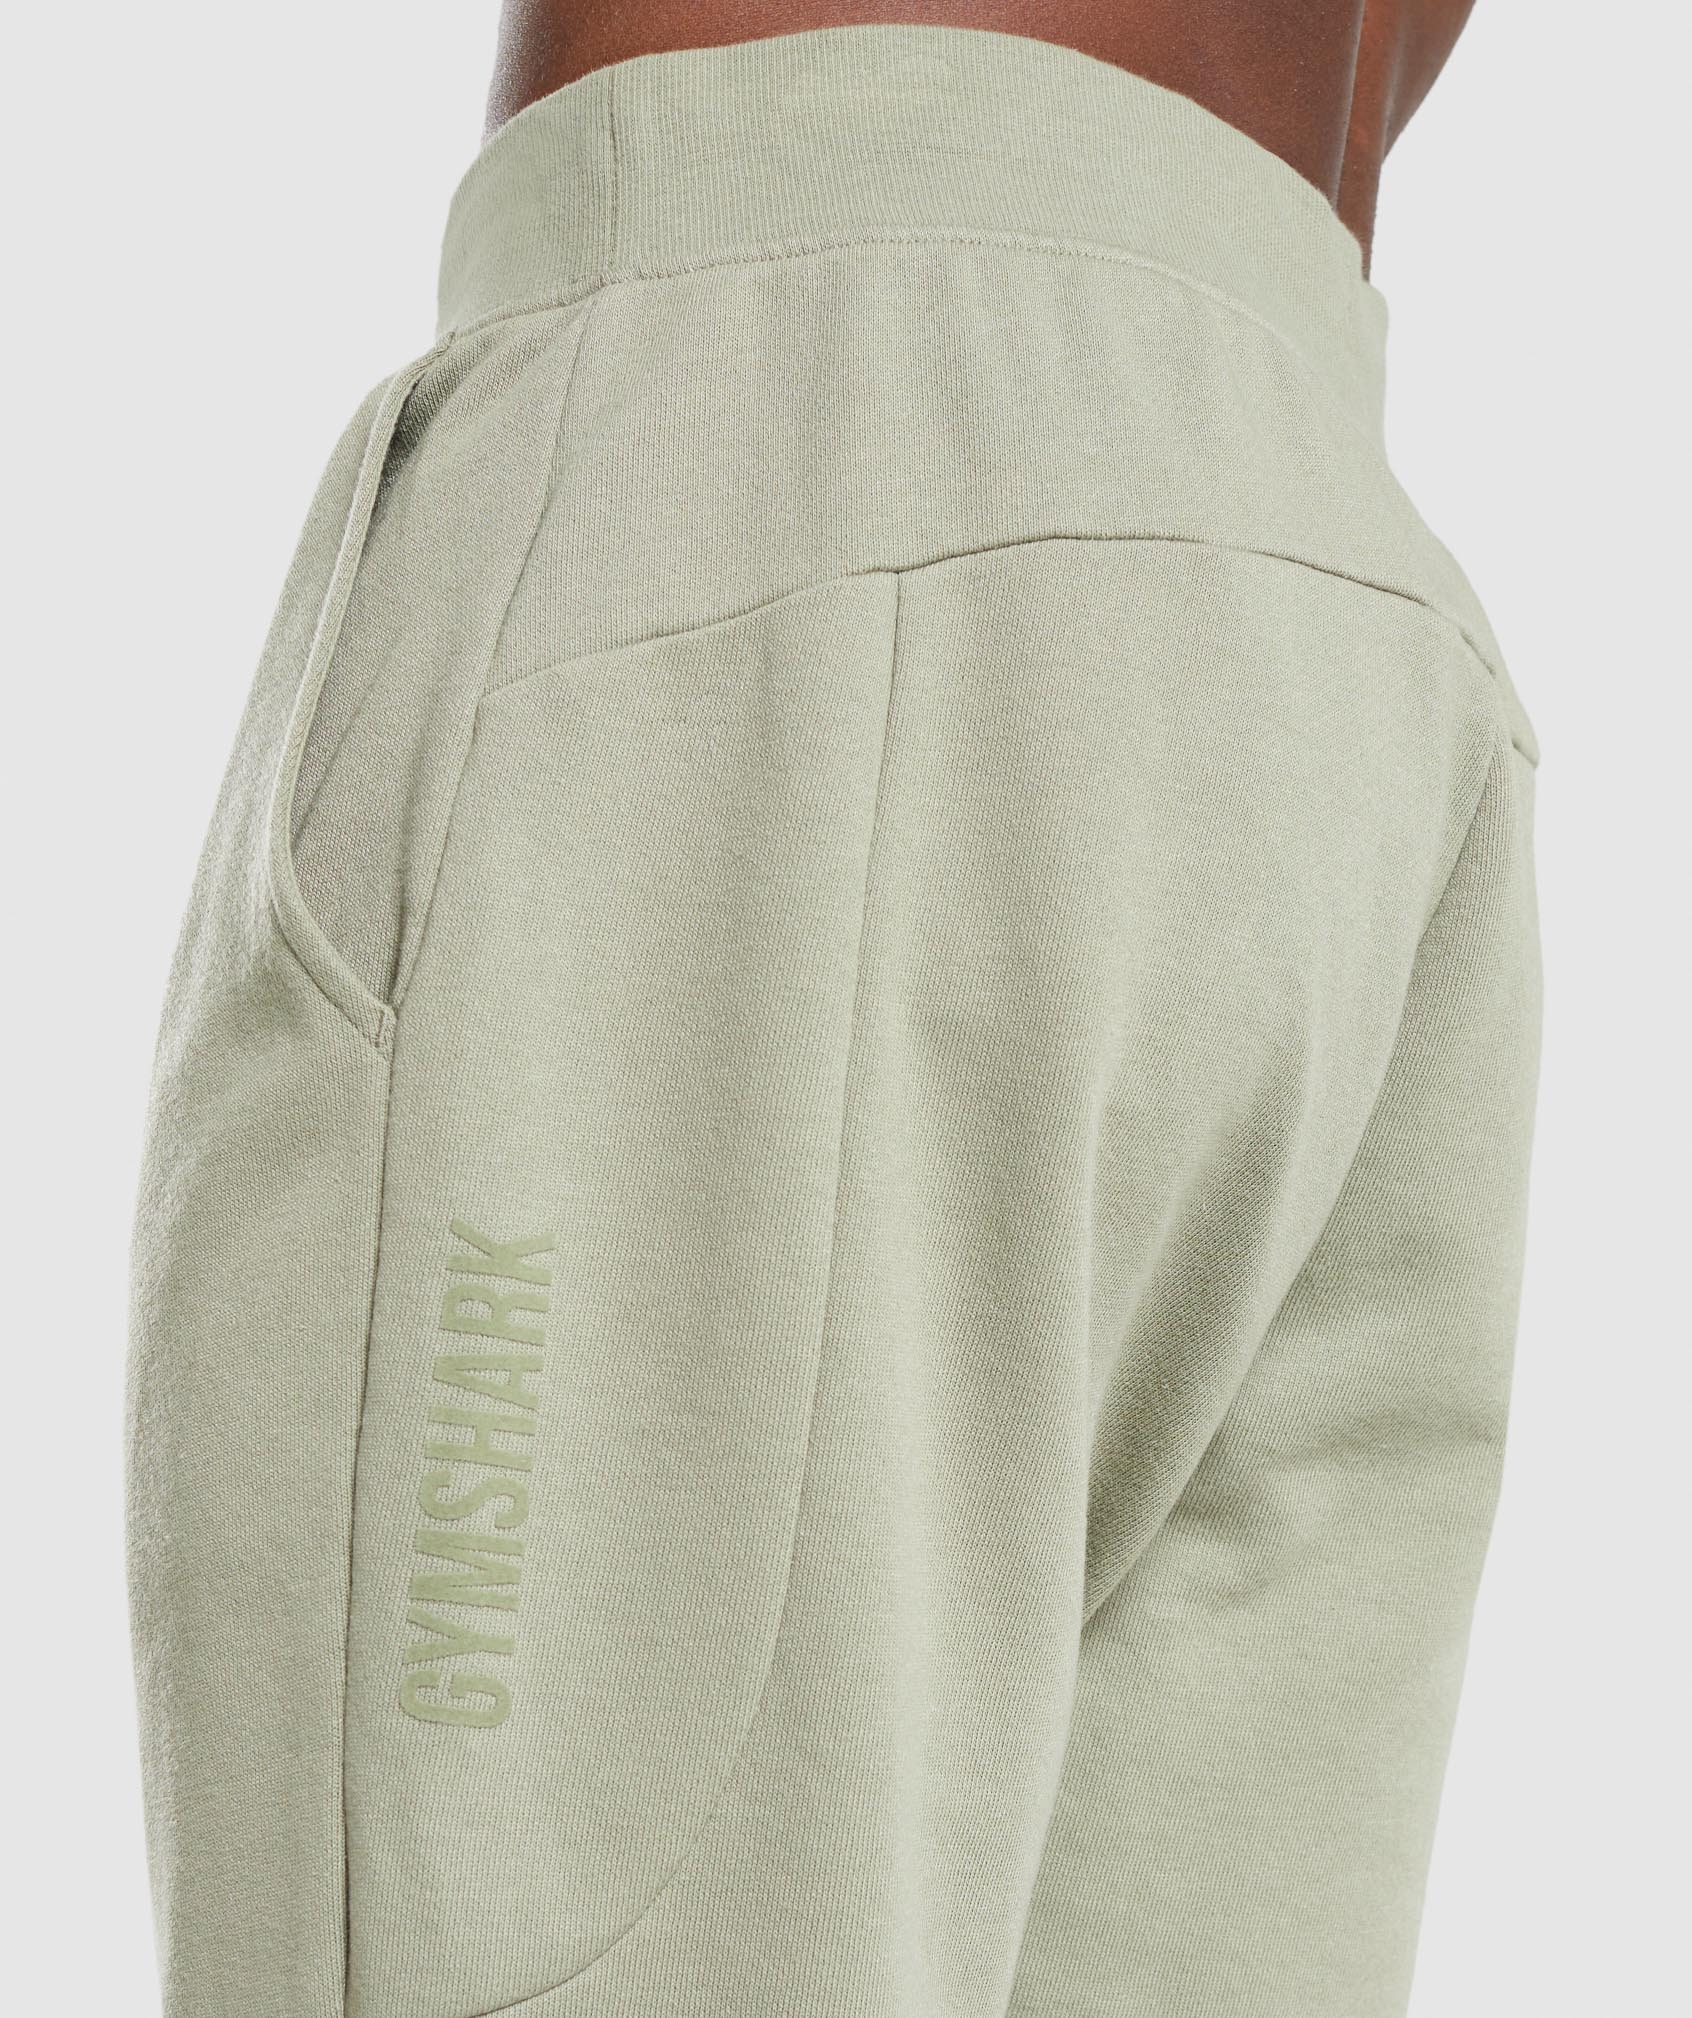 Restore Joggers in Light Green - view 6